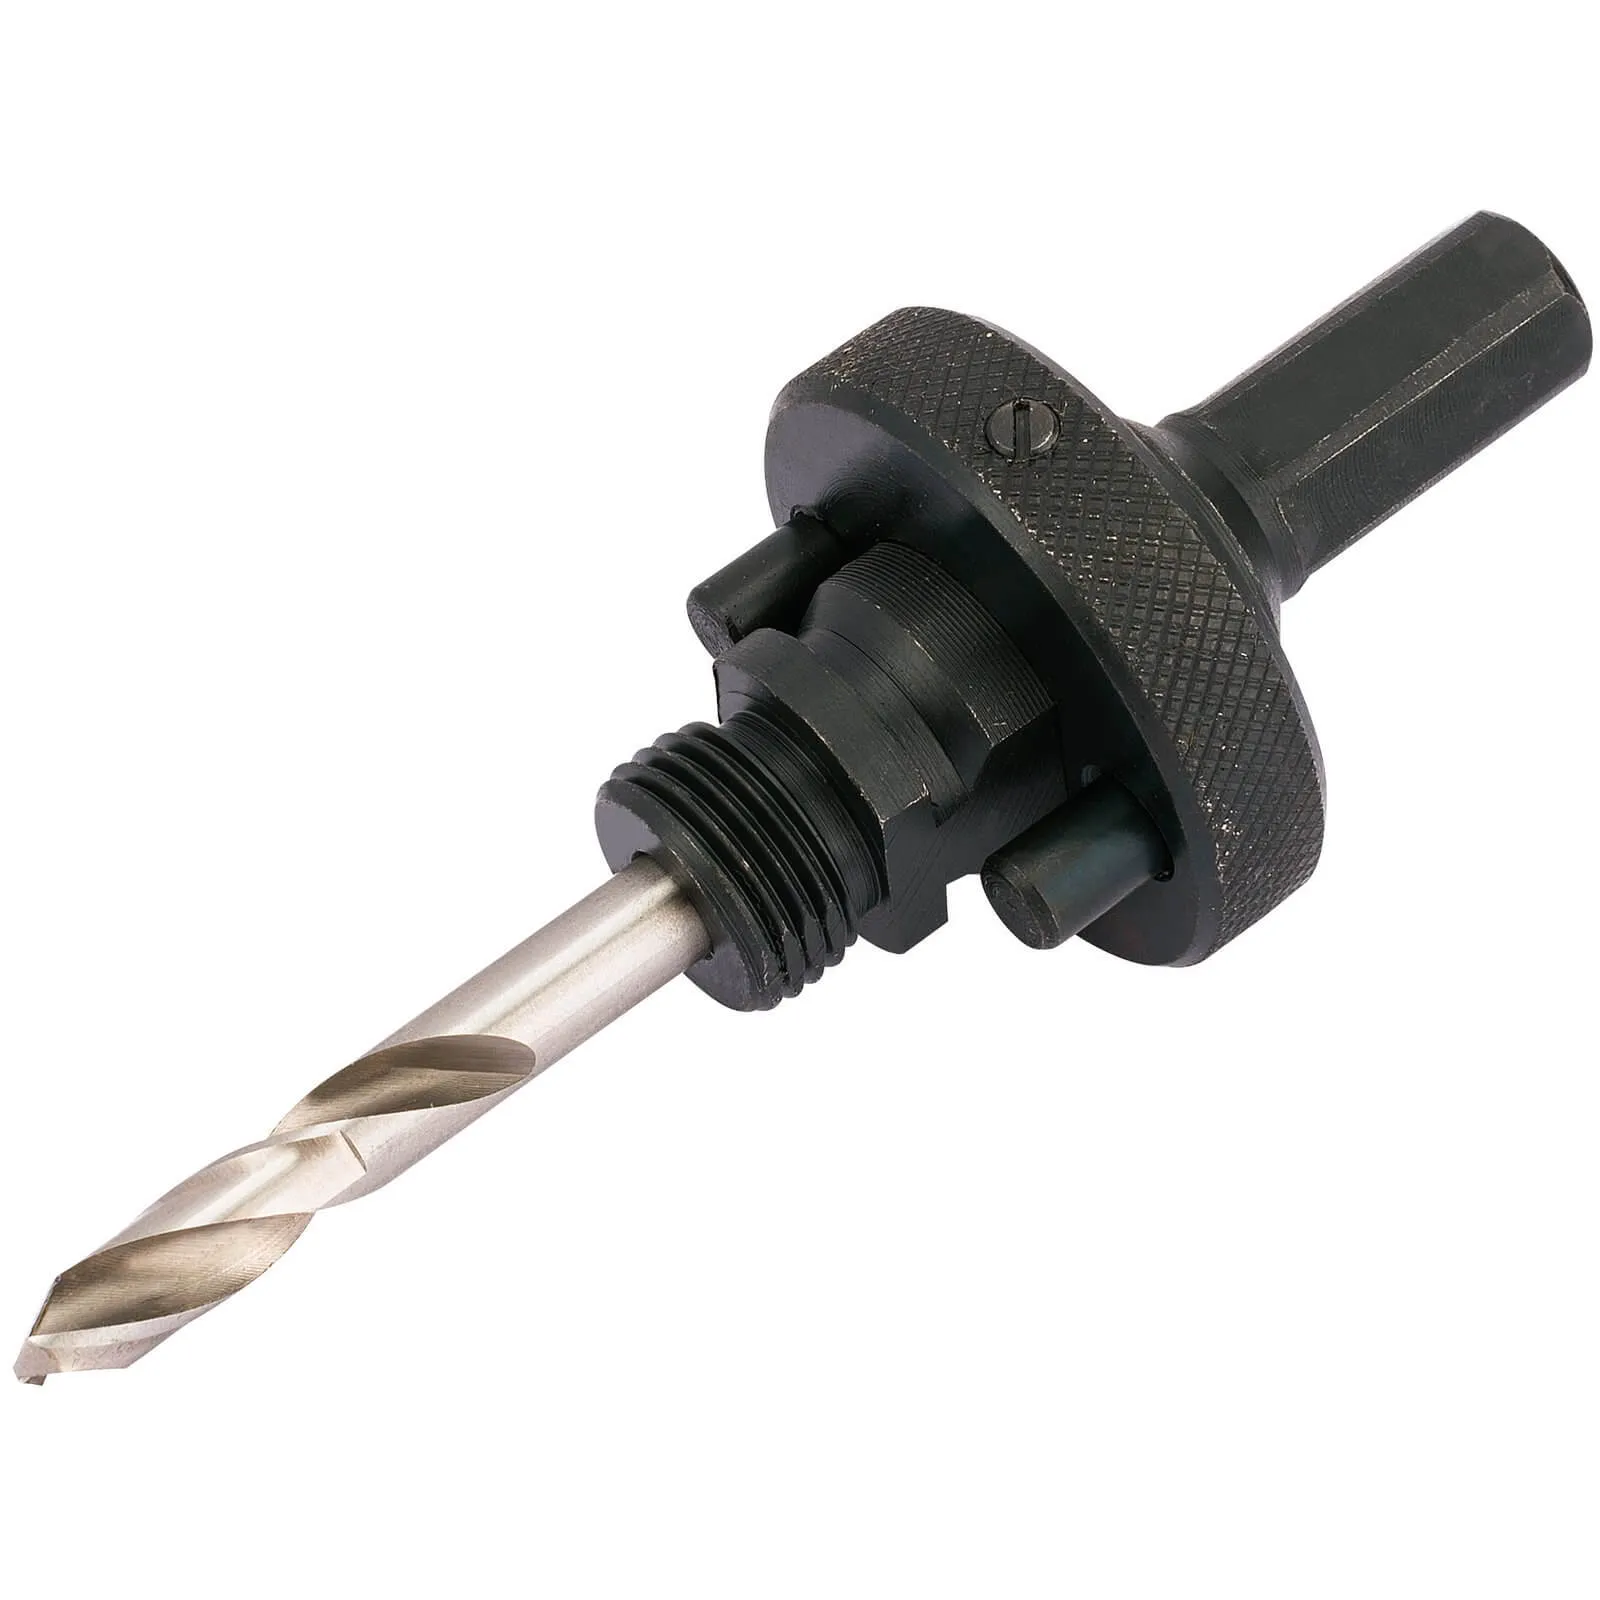 Draper Arbor 11mm Shank To Suit 32mm - 152mm Hole Saws